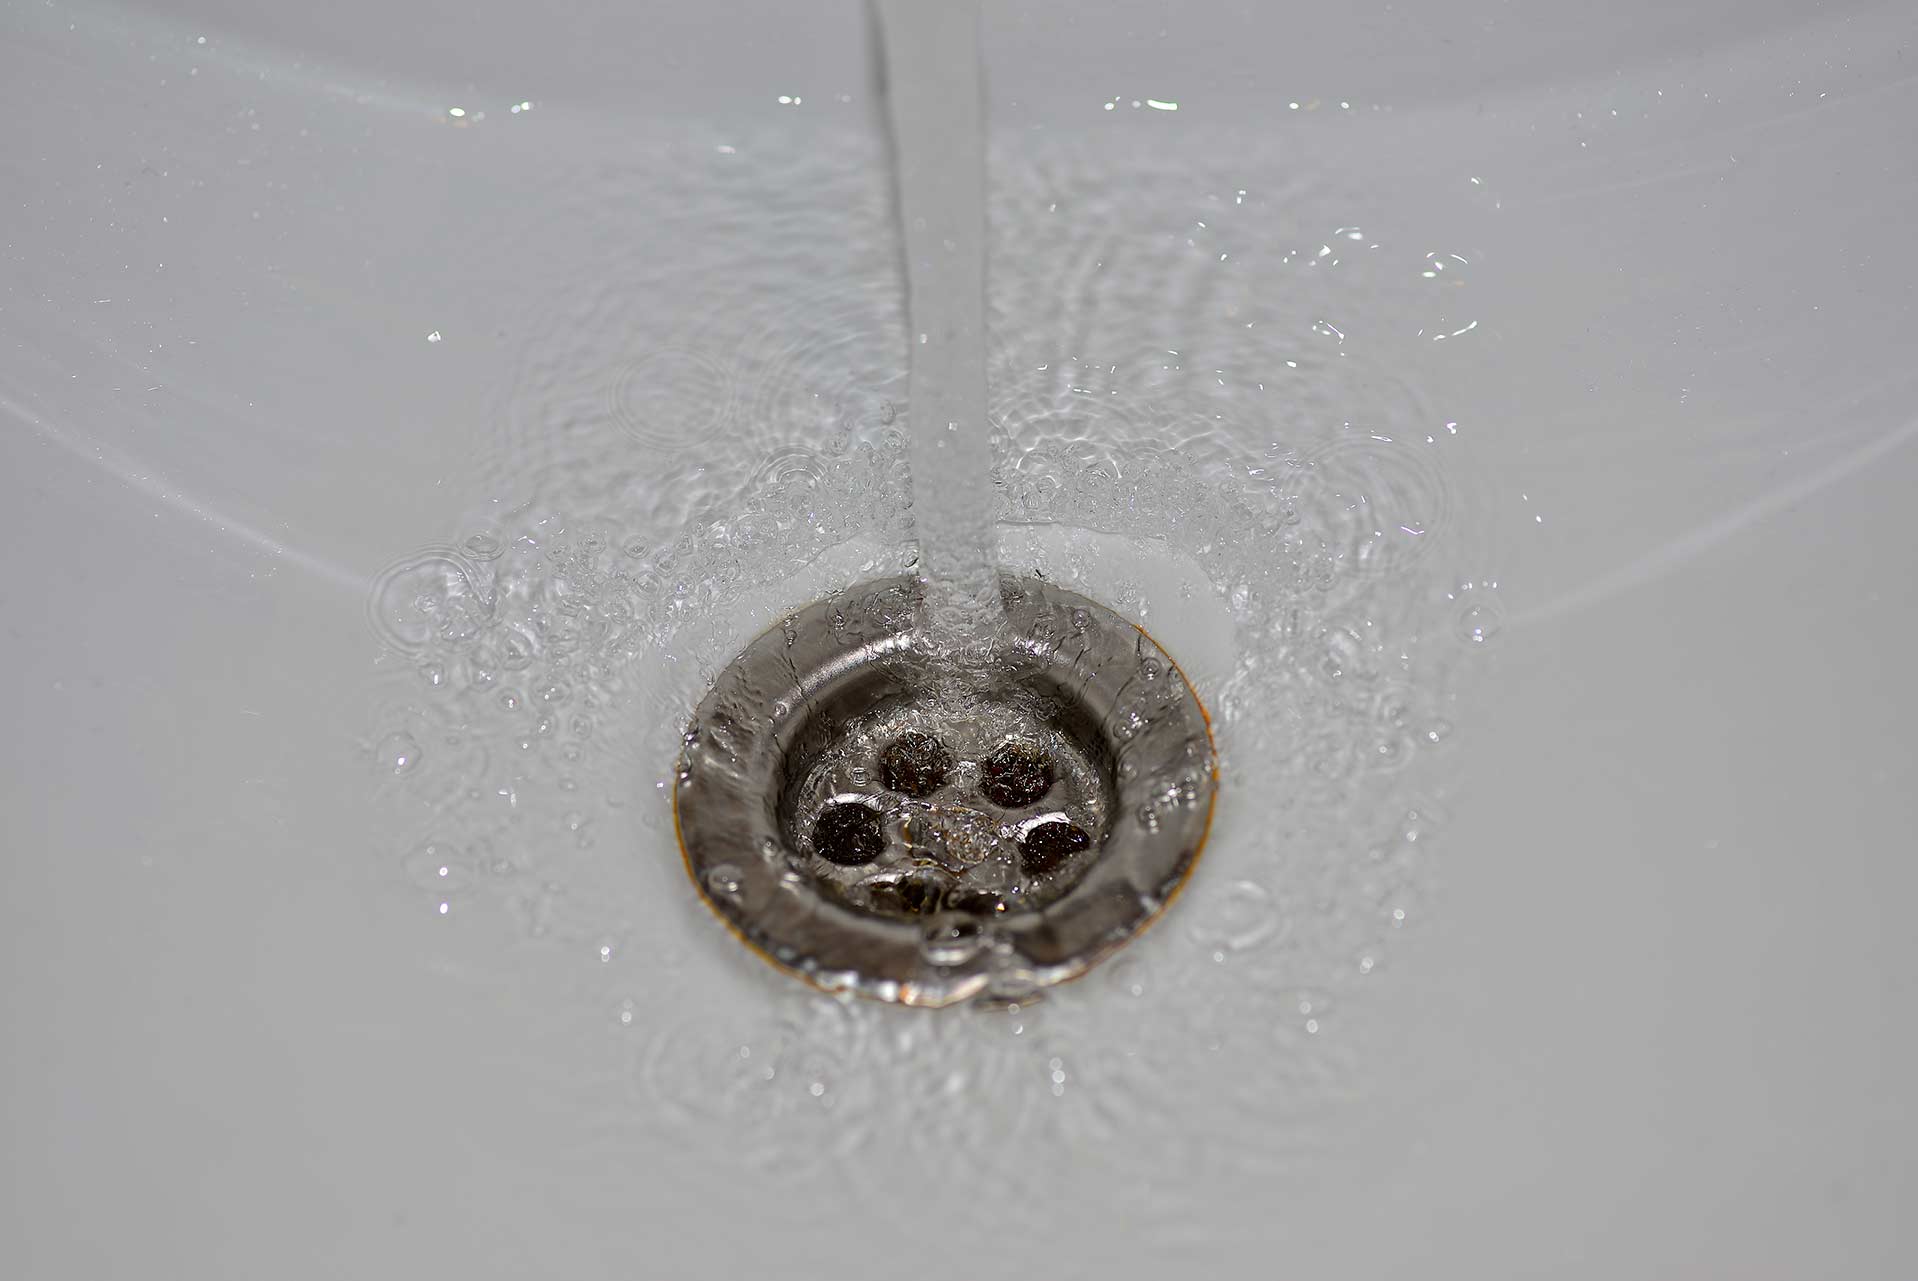 A2B Drains provides services to unblock blocked sinks and drains for properties in Bexleyheath.